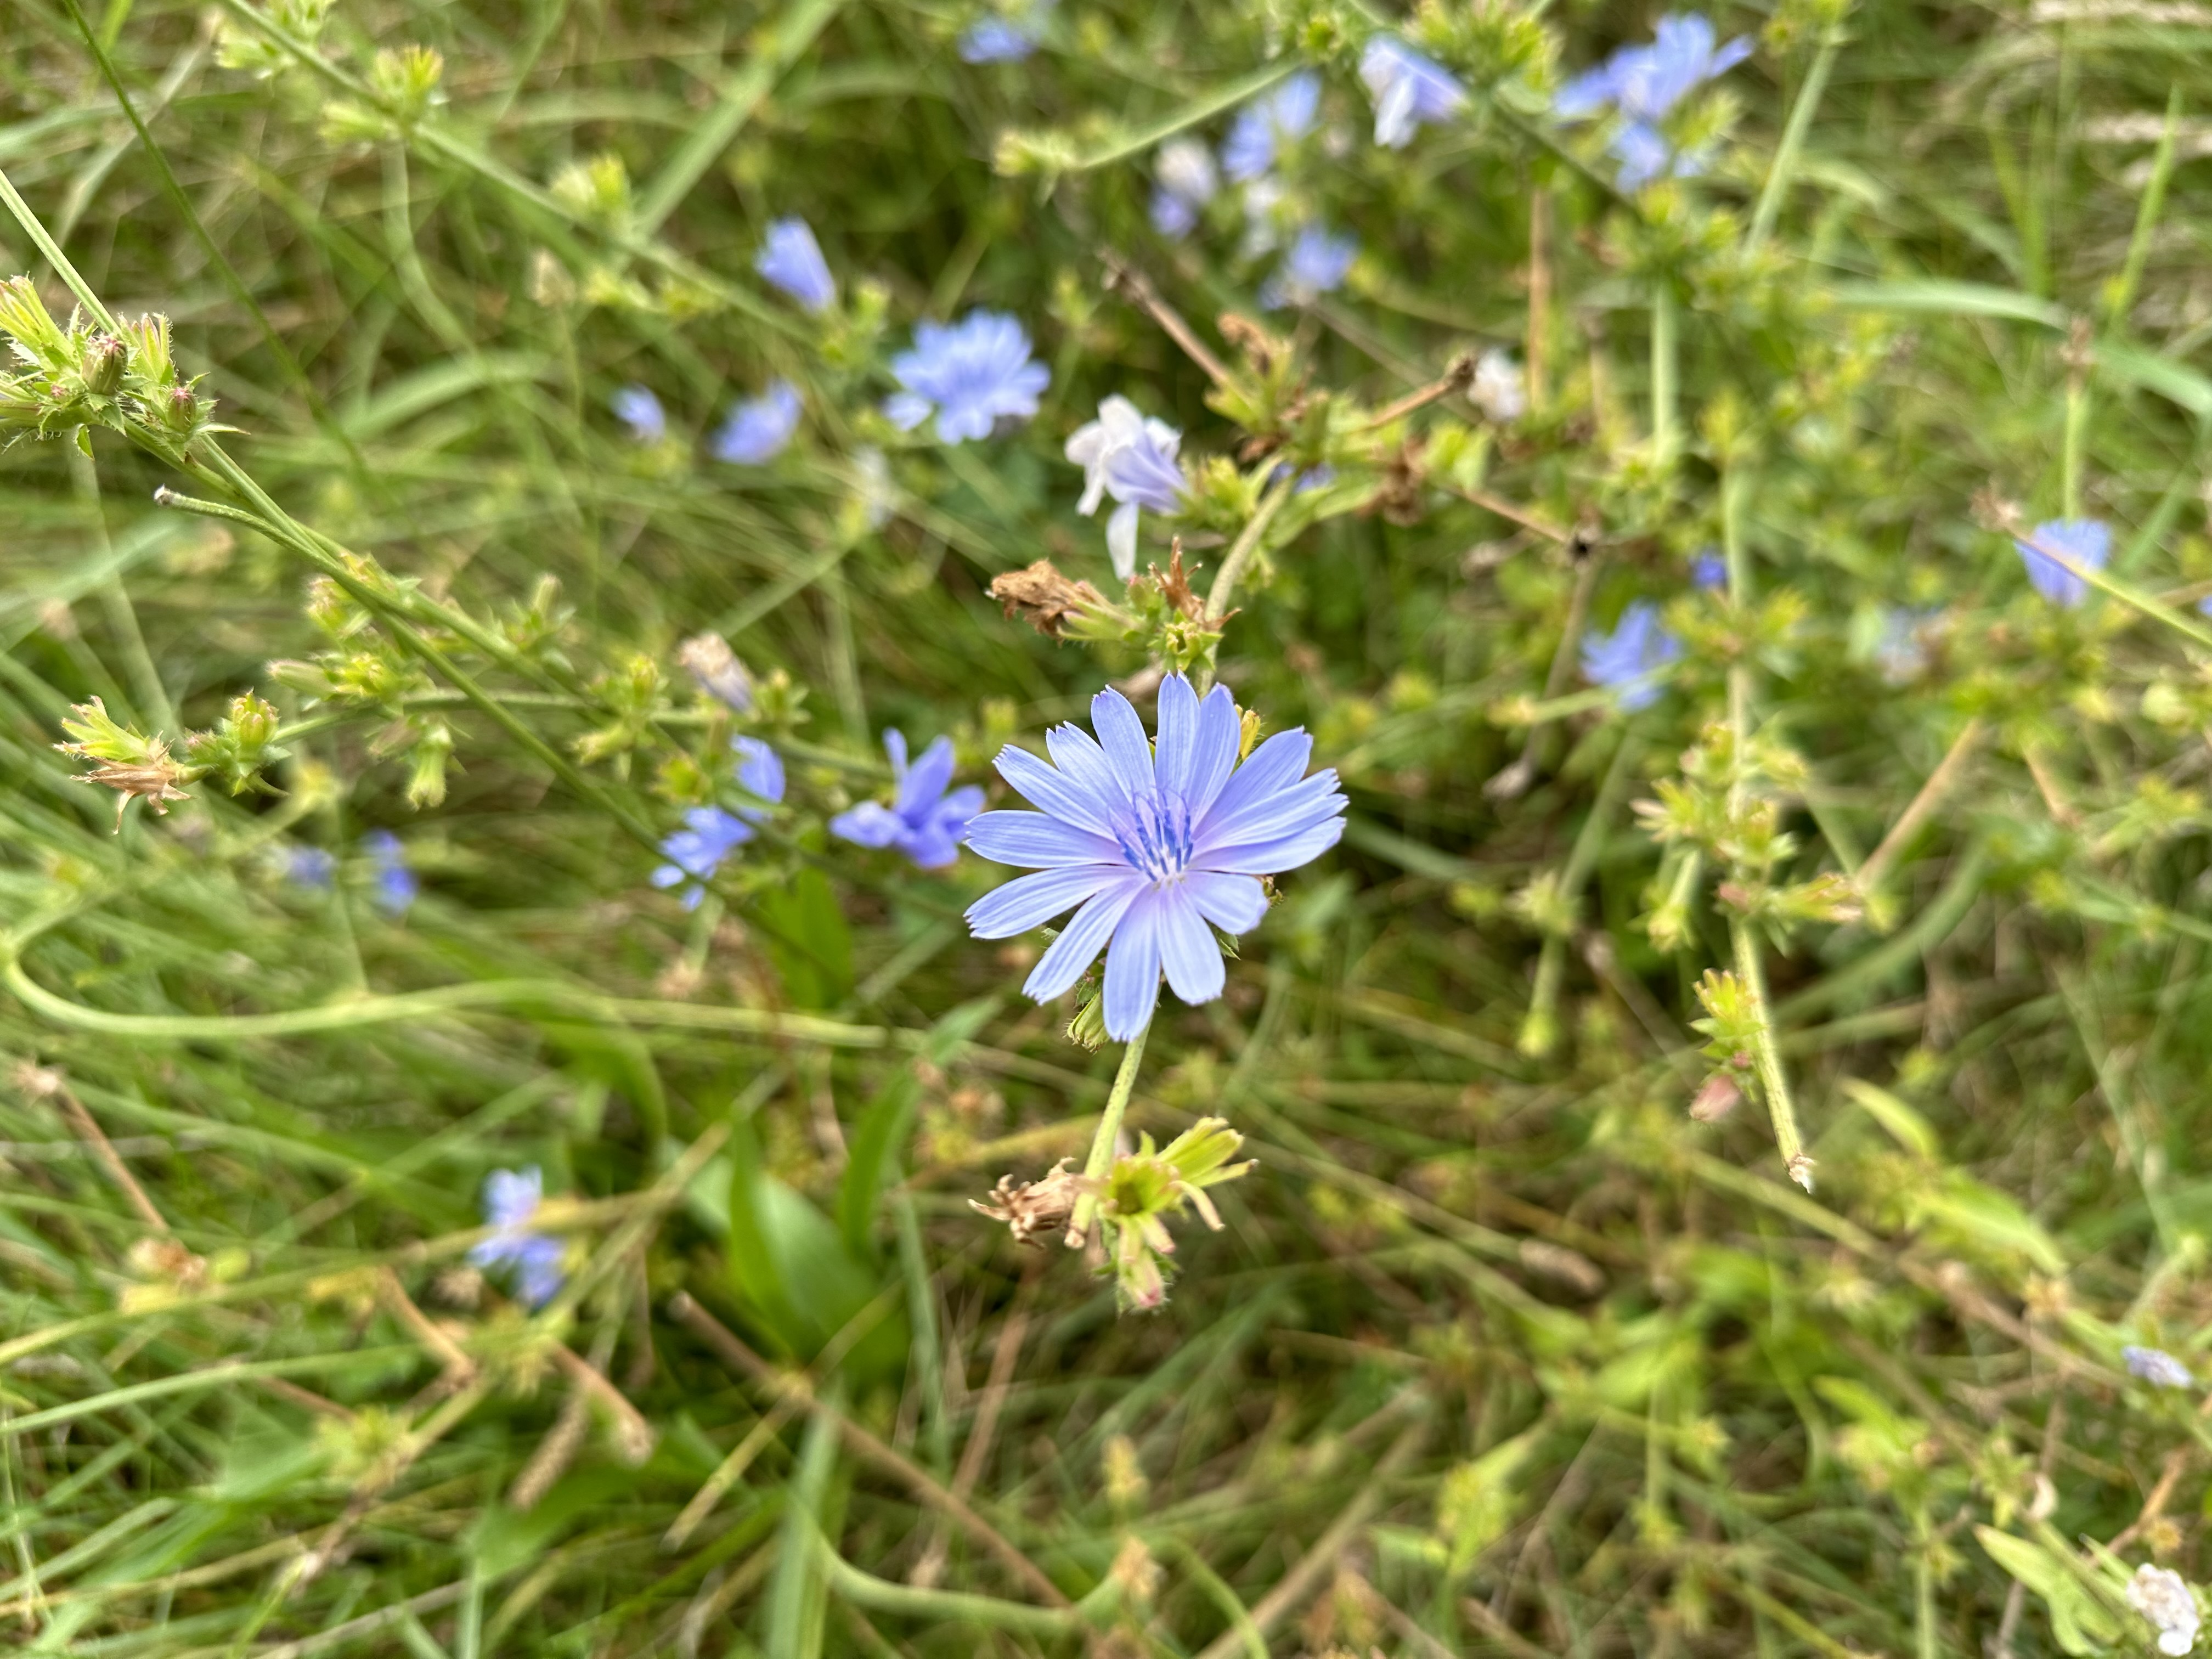 A photo of a flower, taken by the iPhone 14 Pro.